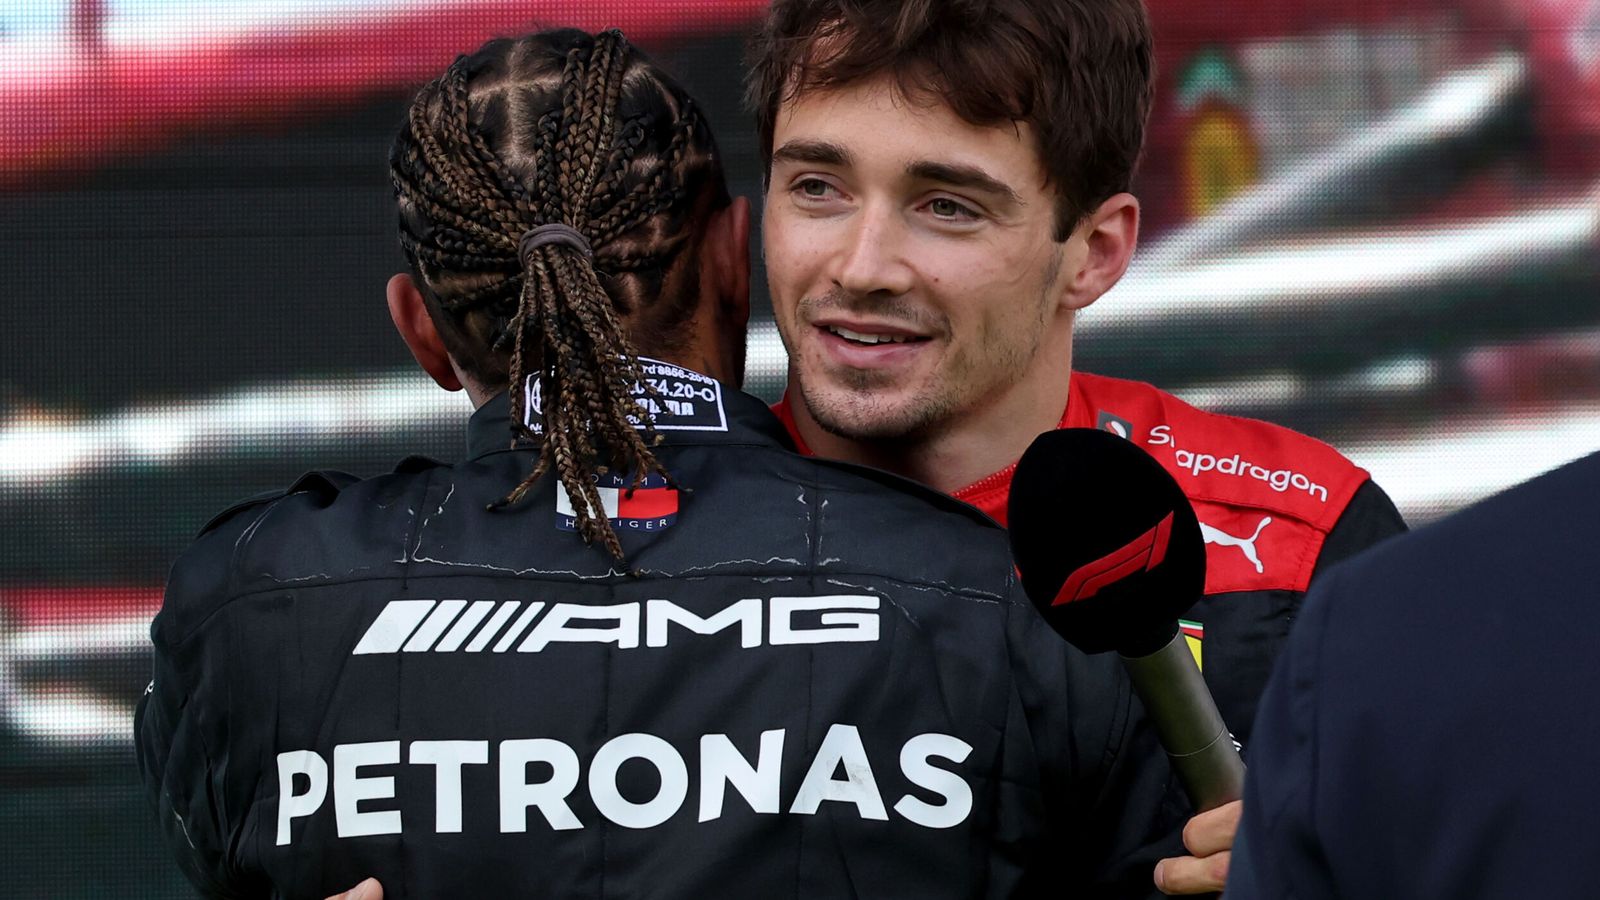 French Grand Prix: Live updates from race as Charles Leclerc starts on pole ahead of Max Verstappen